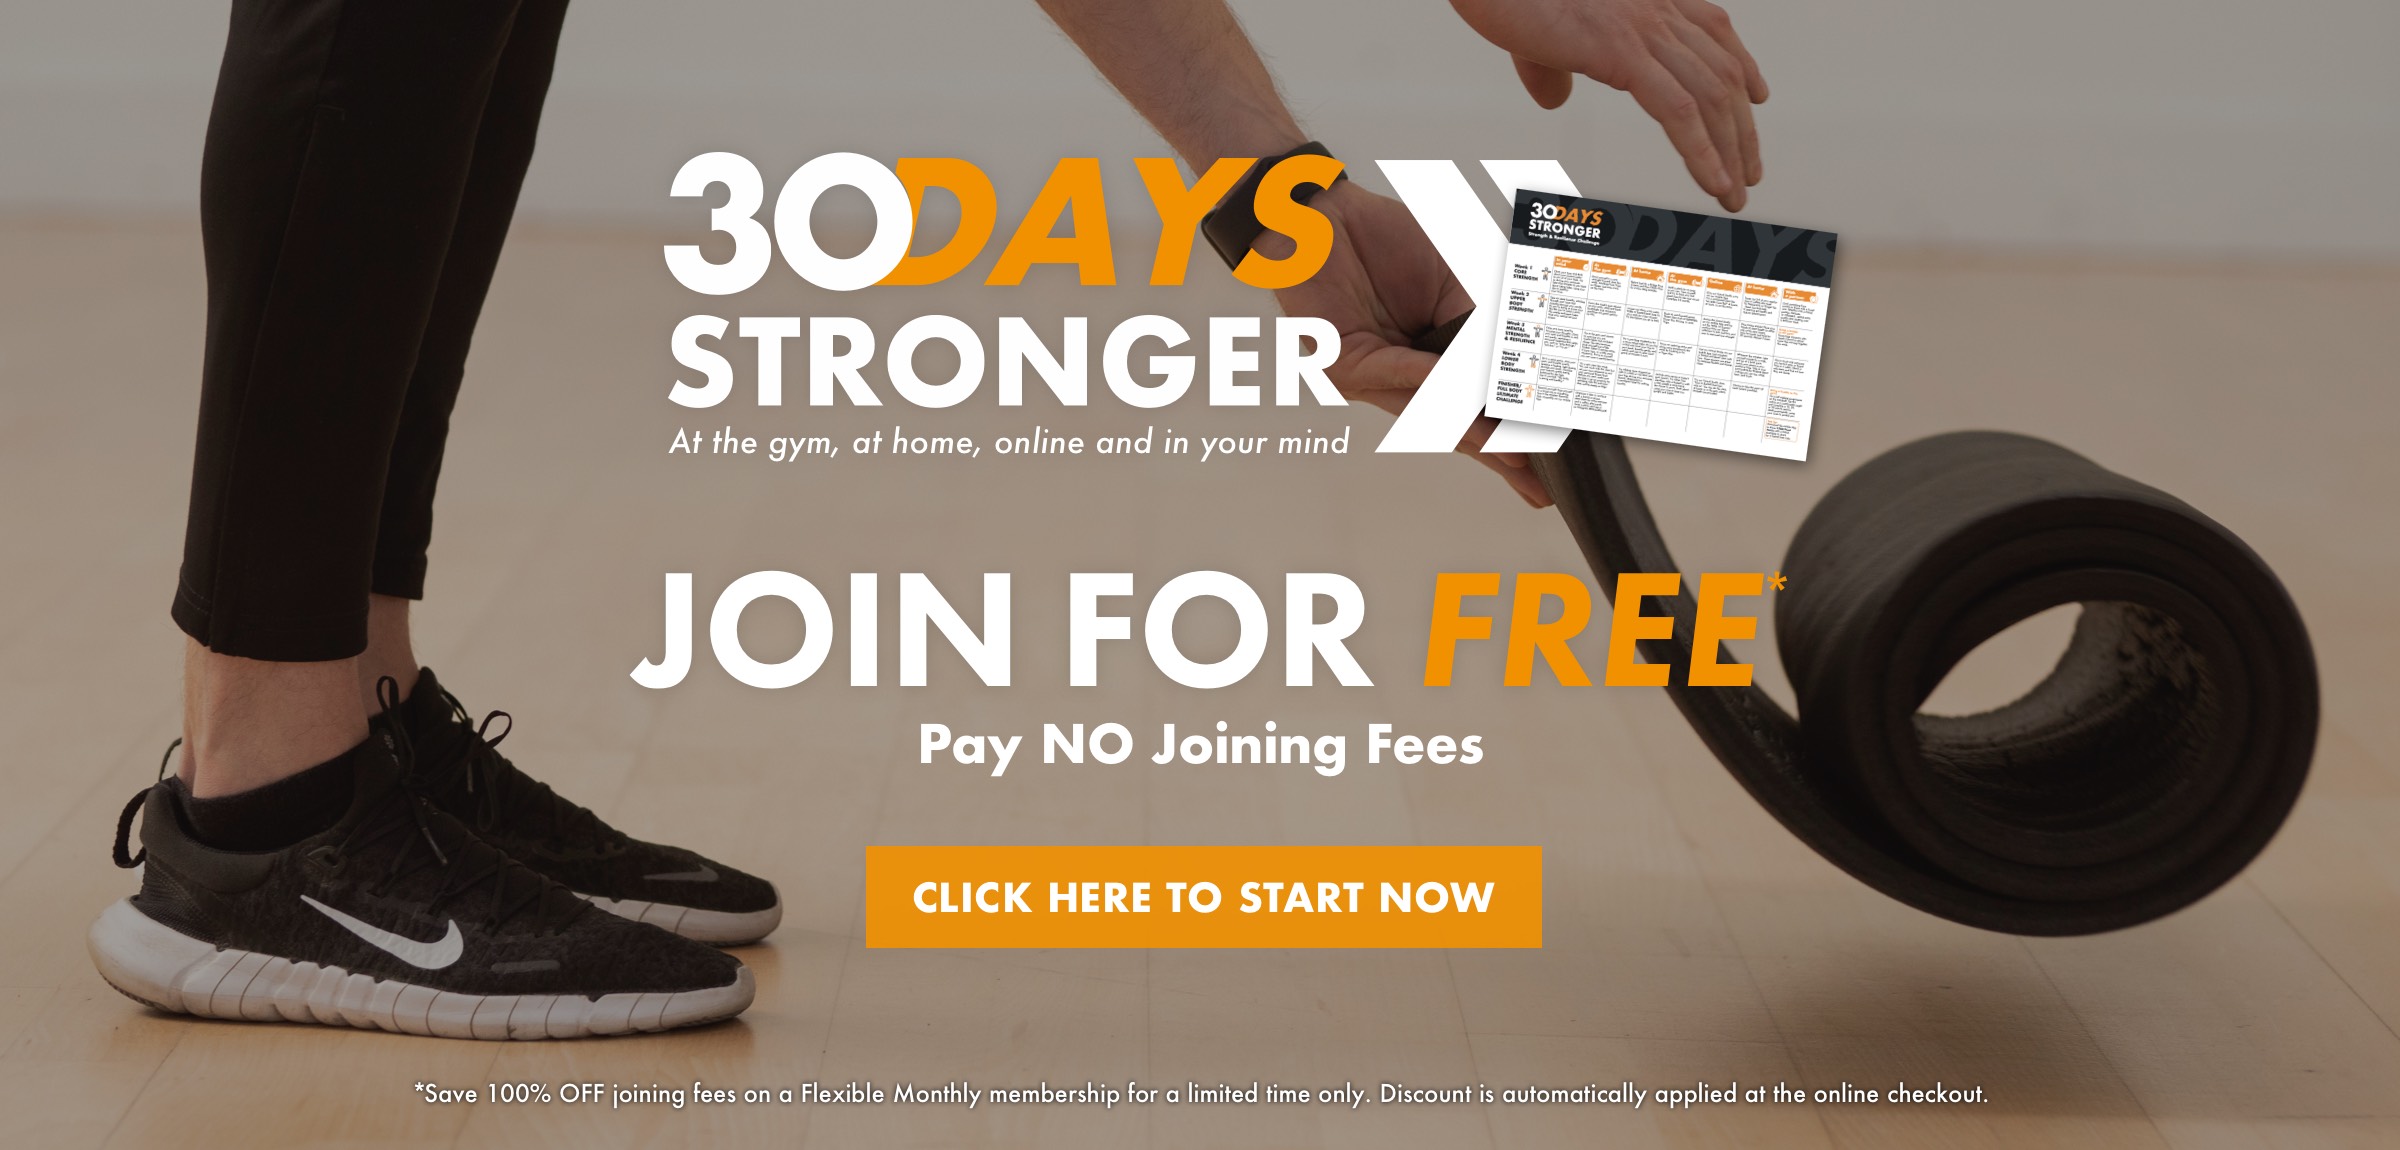 30 Days Stronger - Join Gym for FREE